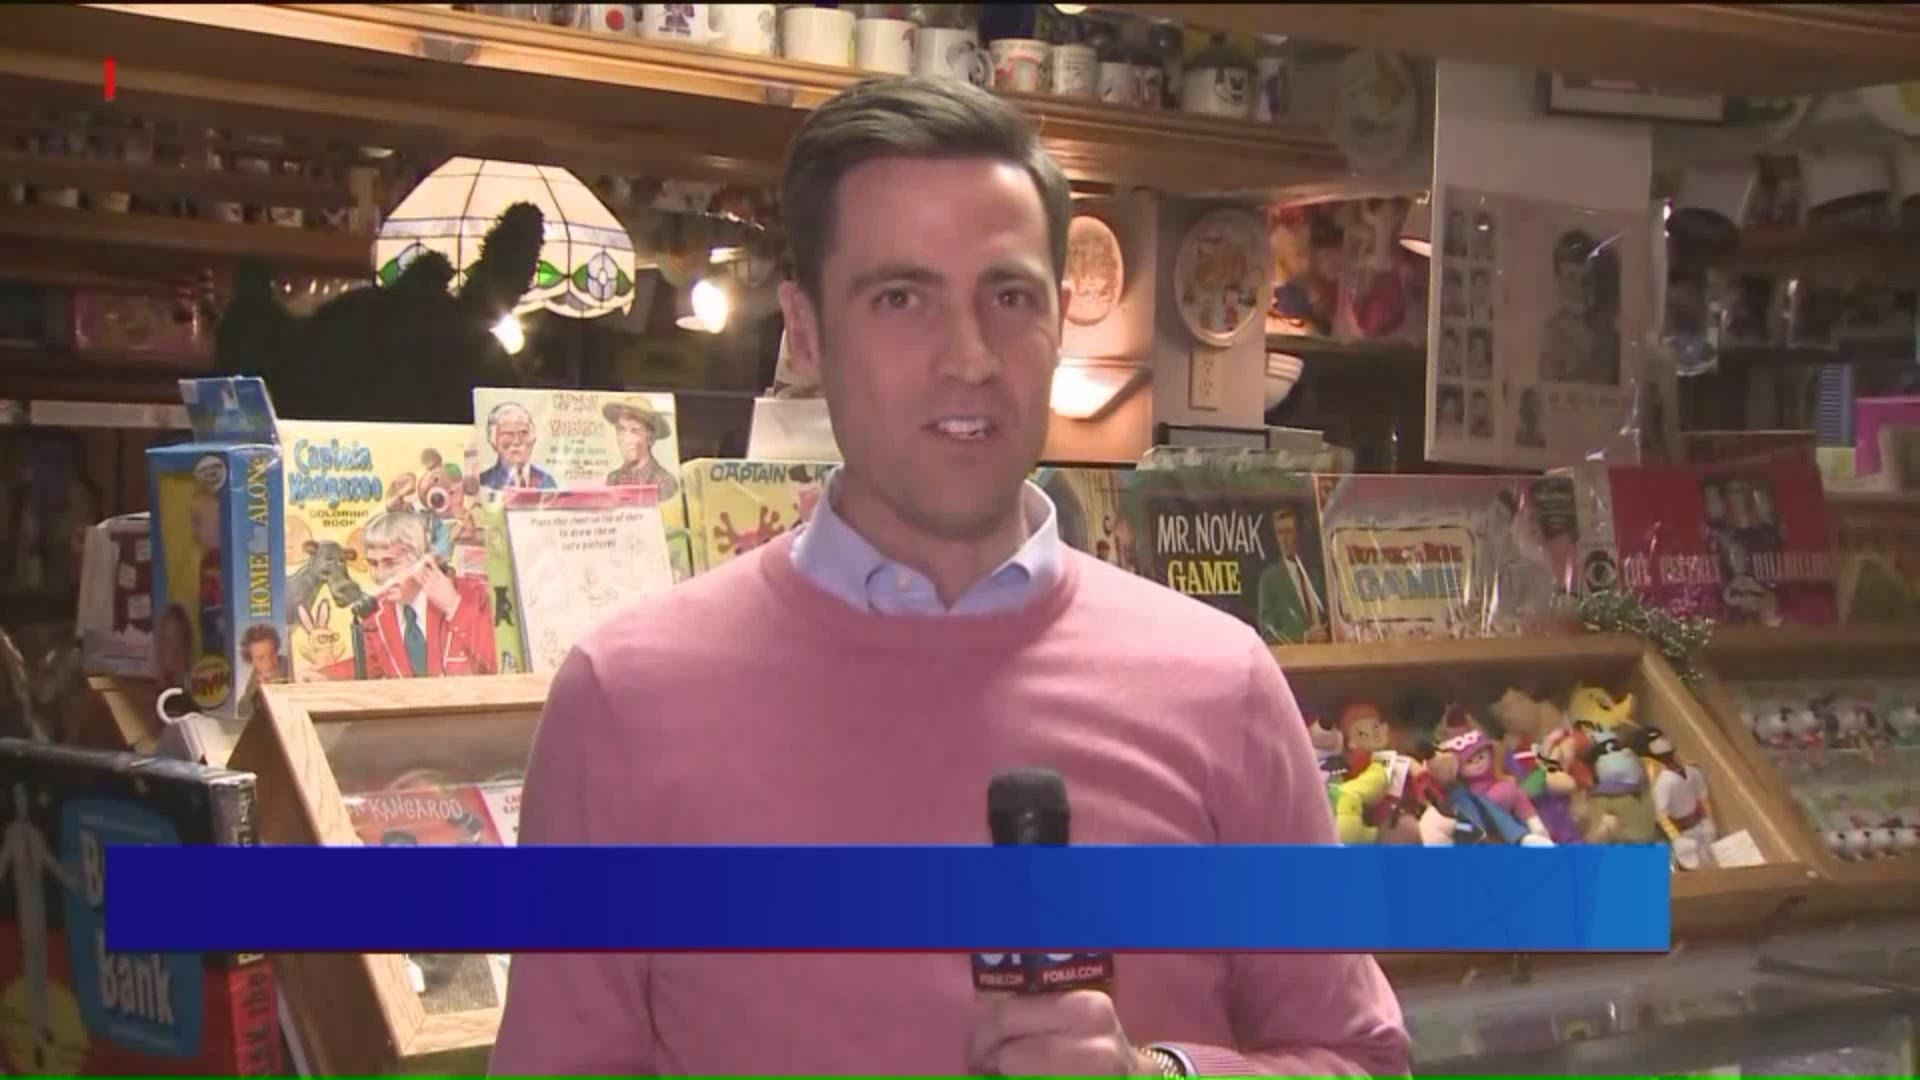 The family attraction on Route 10 in Cheshire has a collection of more than 80,000 toys